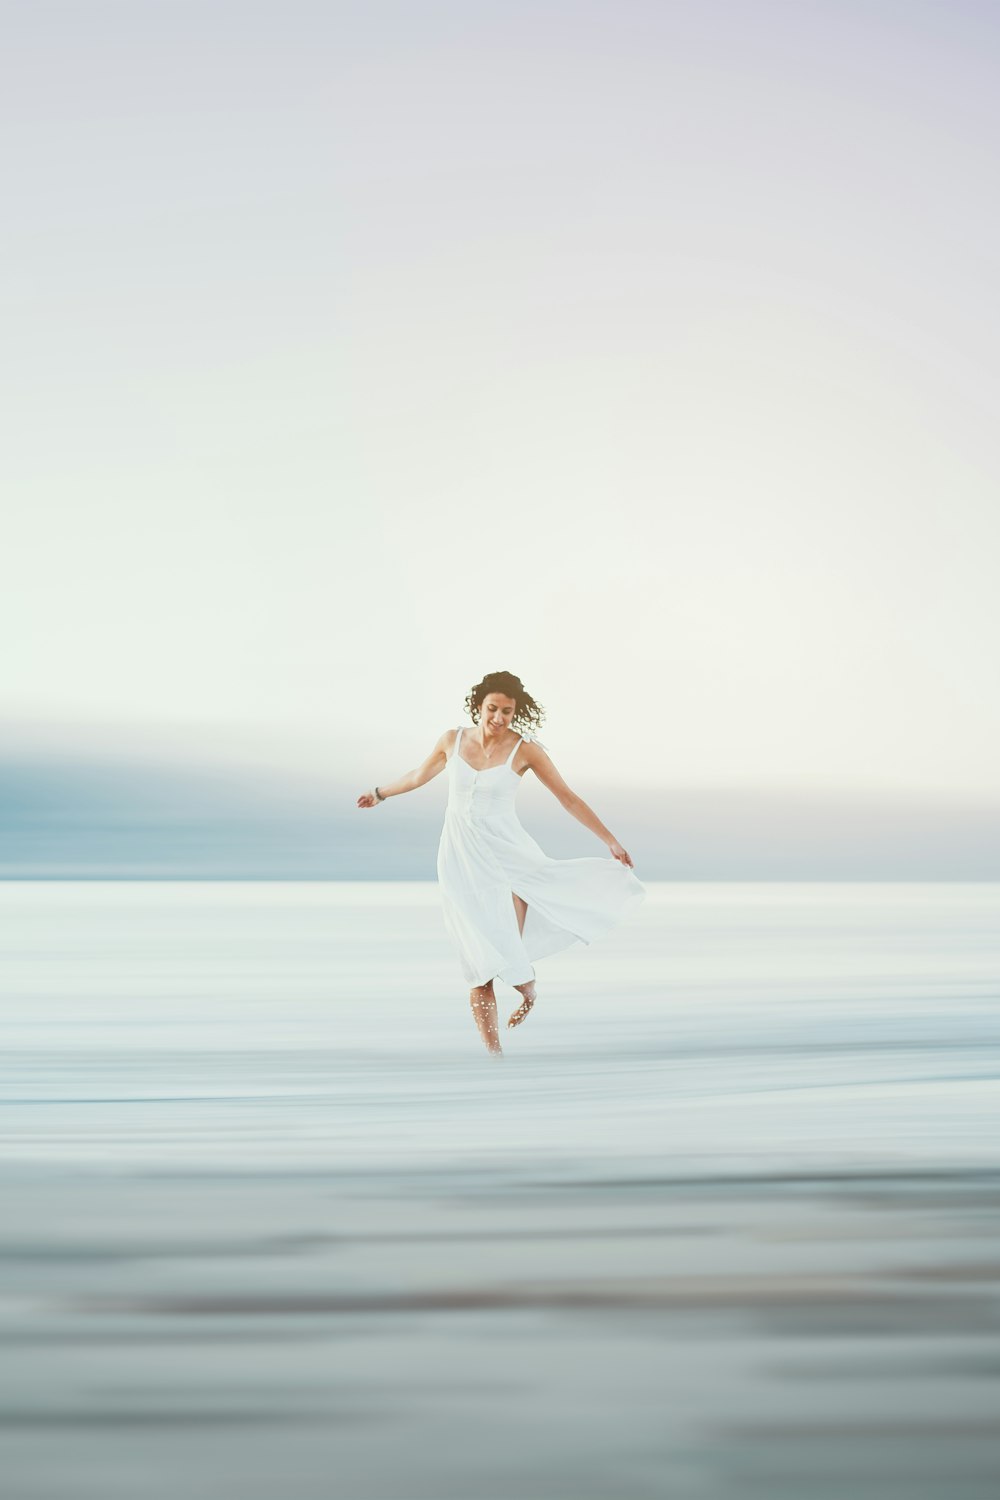 Woman In White Dress Pictures | Download Free Images on Unsplash